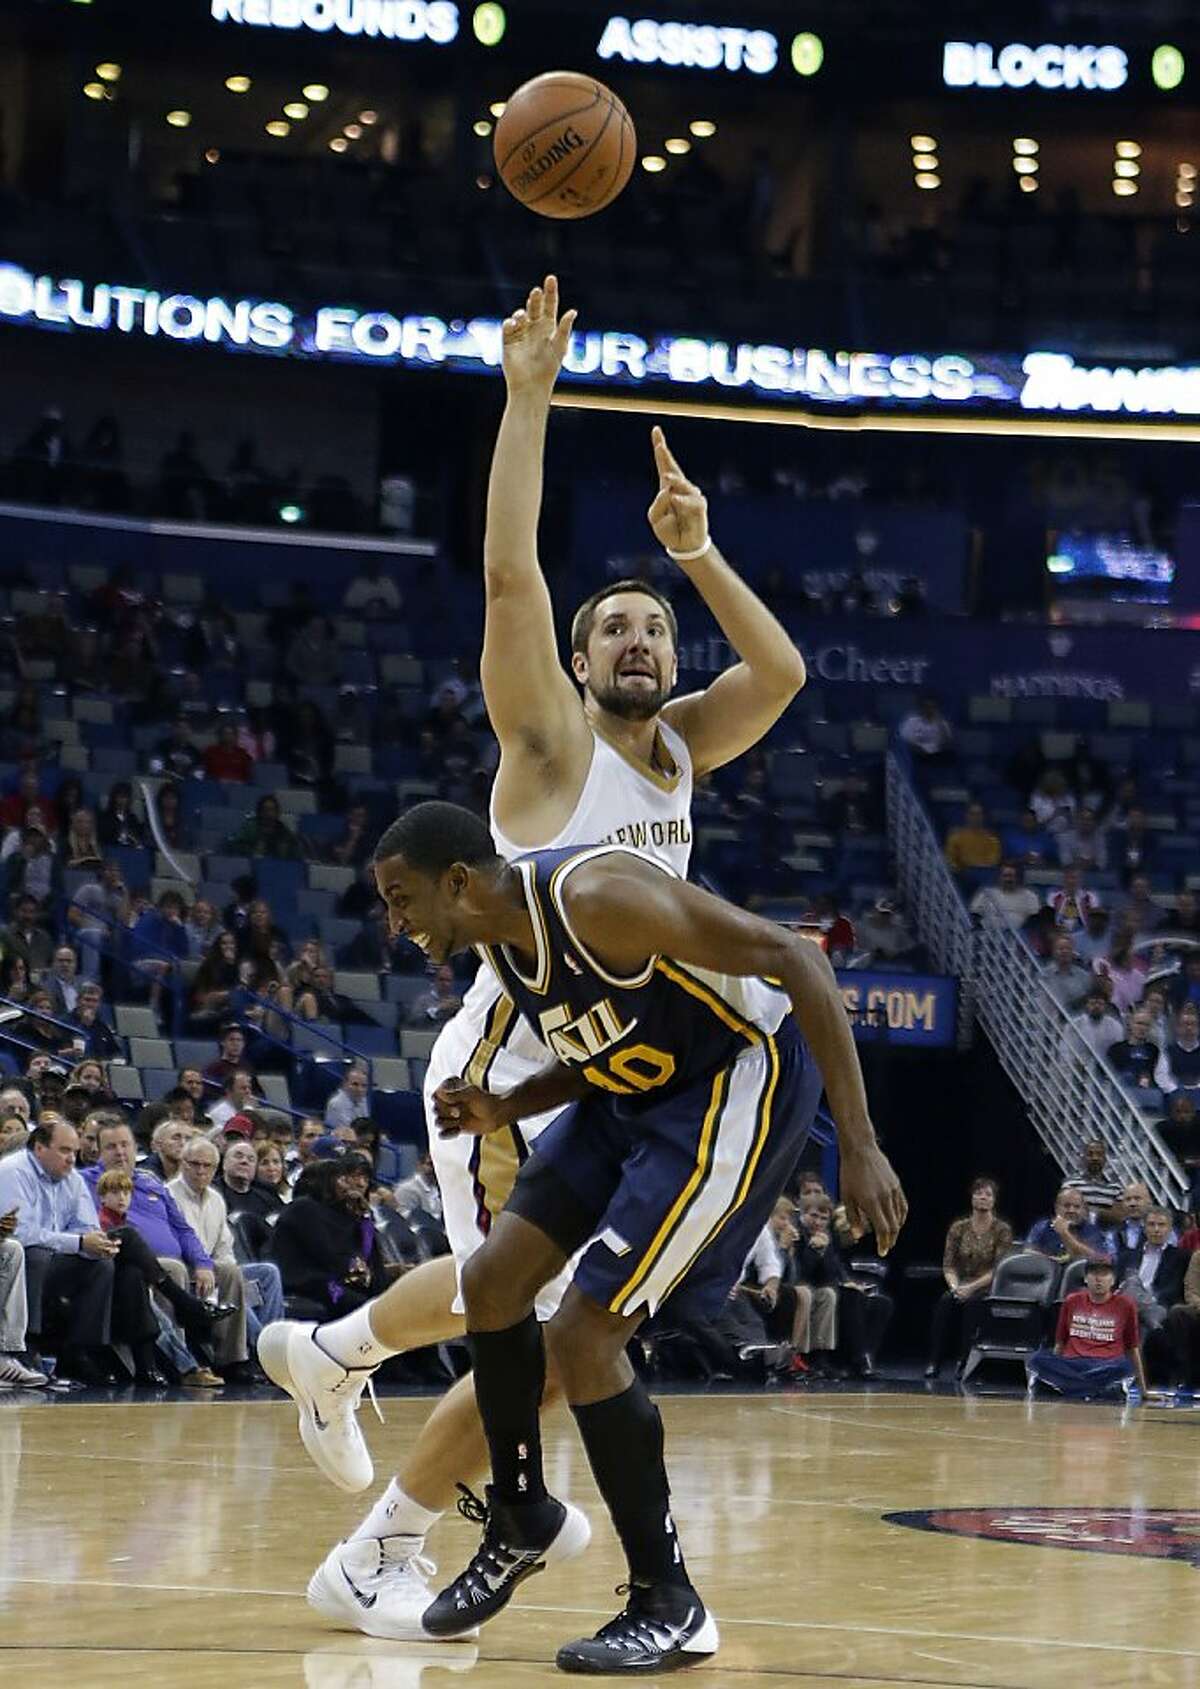 New Orleans Pelicans power forward Ryan Anderson, top, shoots as he draws a foul by Utah Jazz small forward Jeremy Evans (40) in the first half of an NBA basketball game in New Orleans, Wednesday, Nov. 20, 2013. (AP Photo/Gerald Herbert)